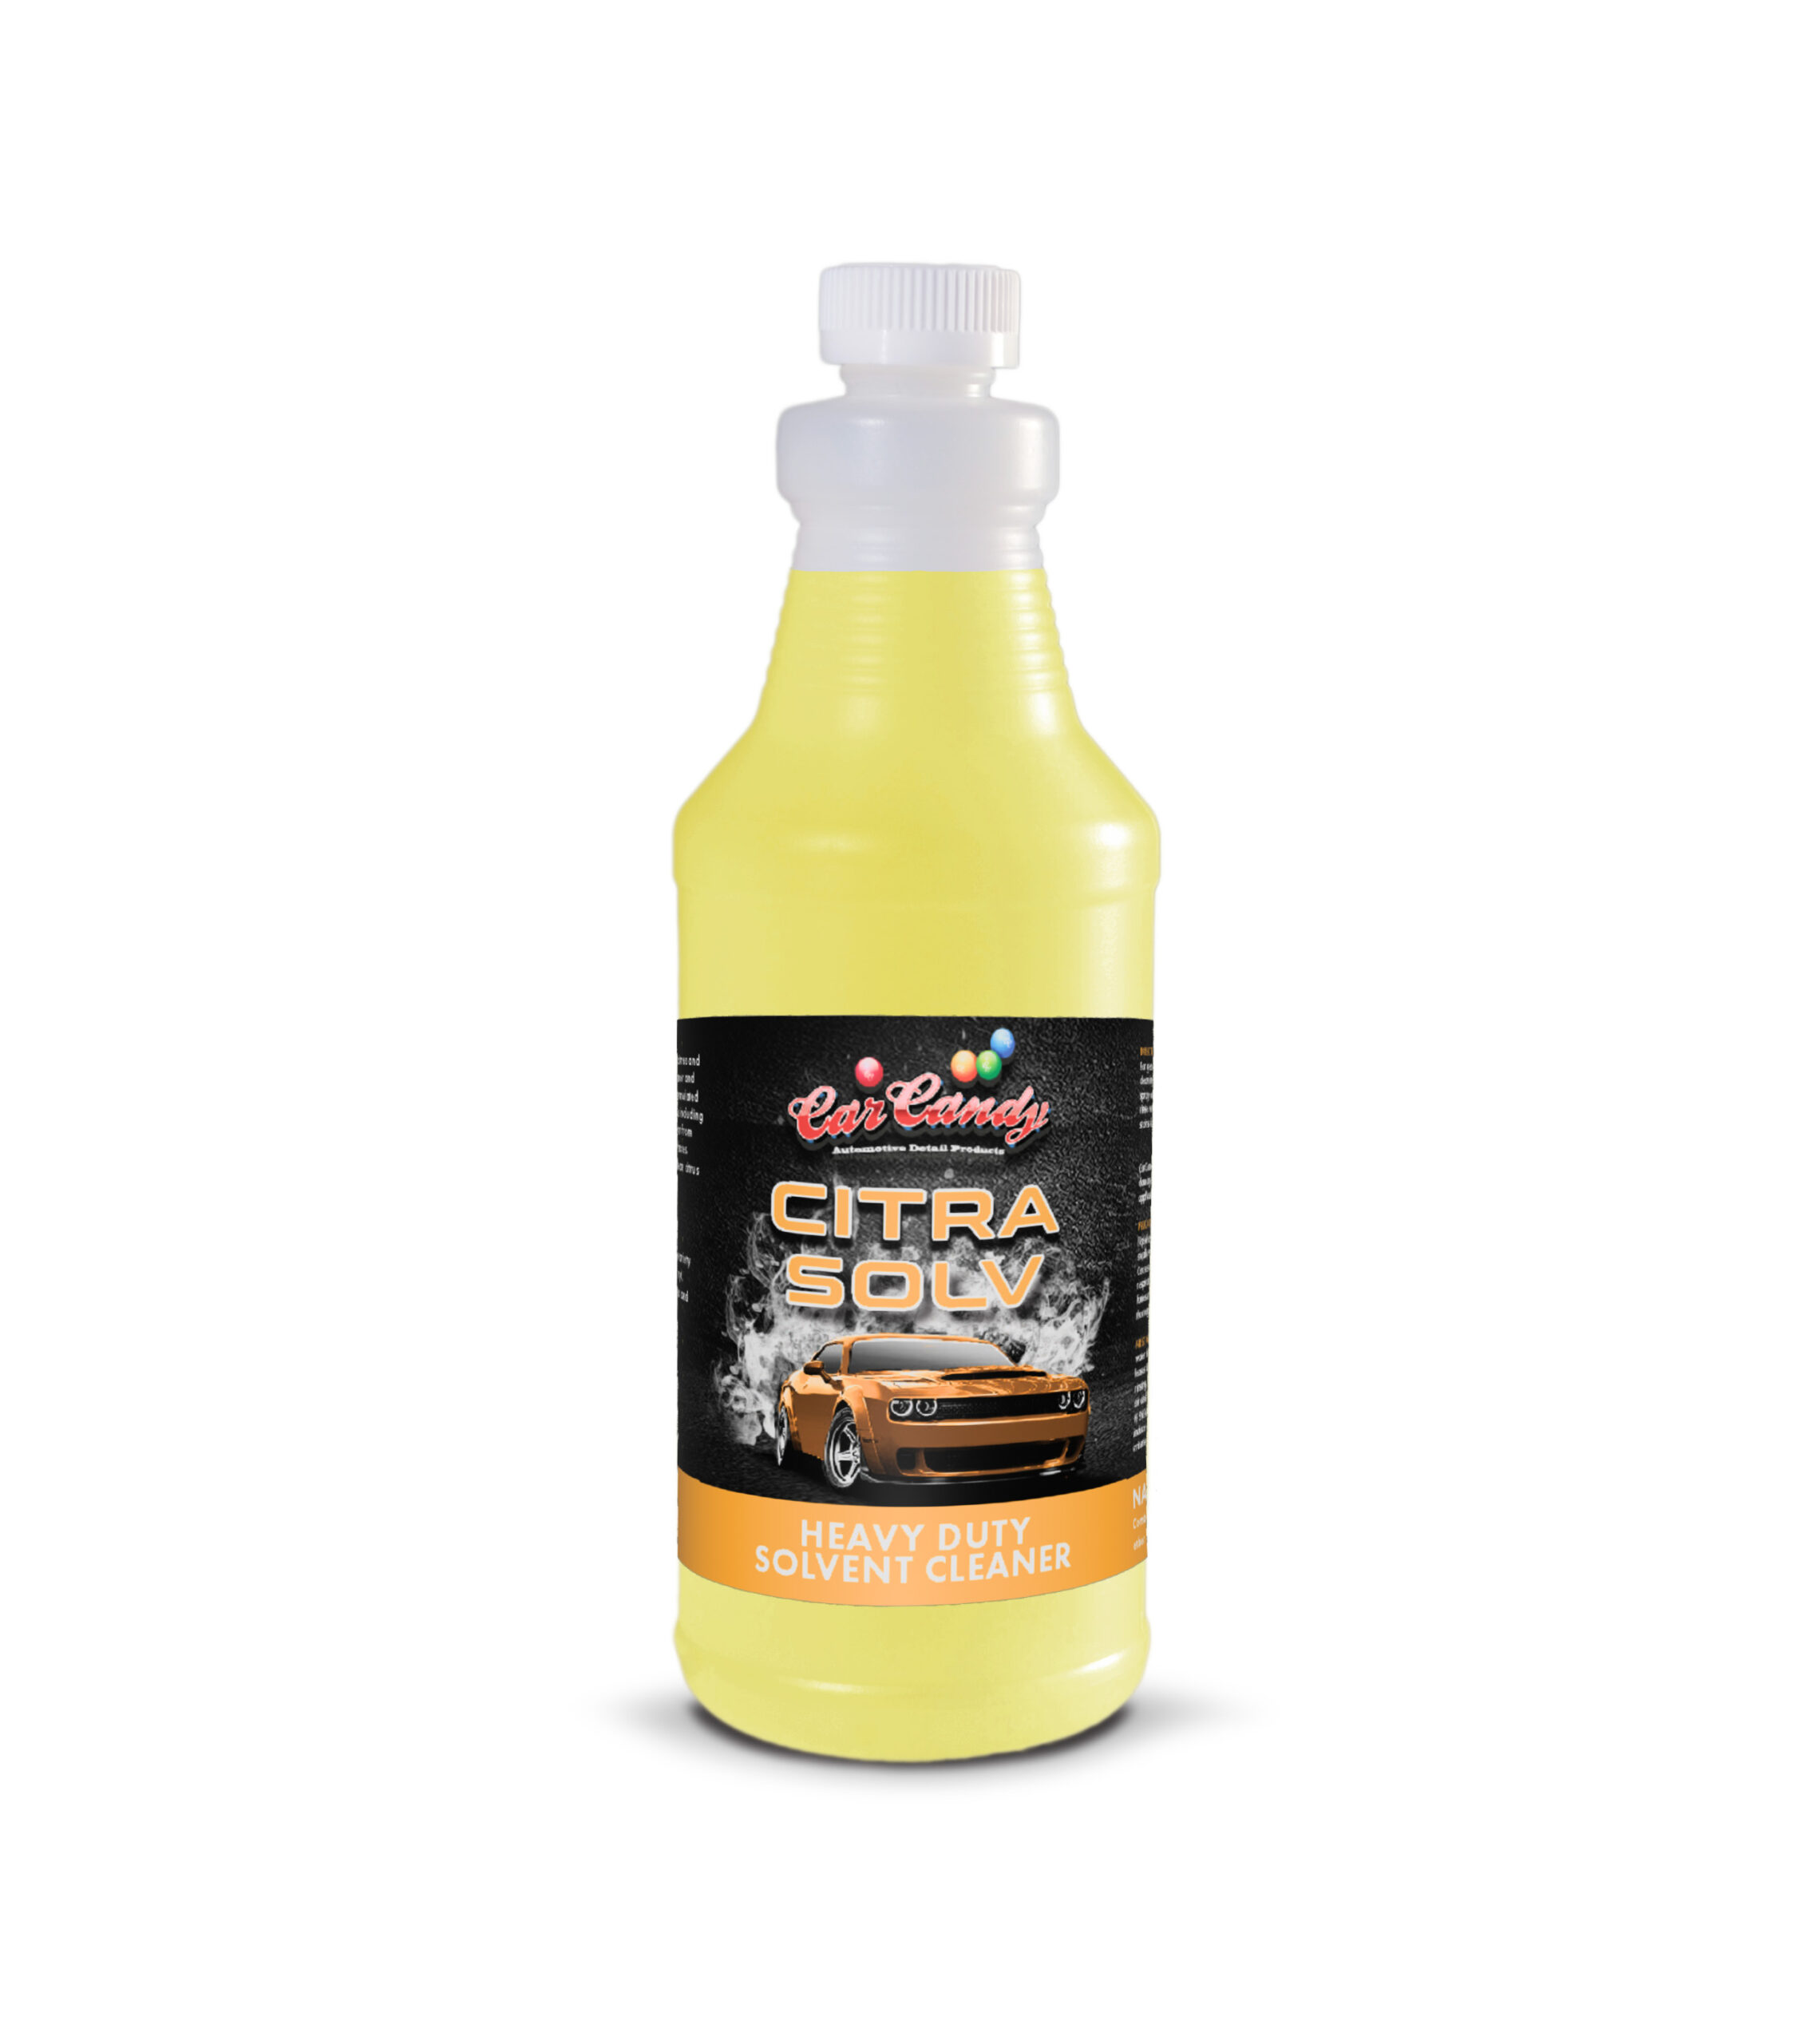 Home Solv by Citra Solv Multi-Purpose Disinfectant Cleaner Spray